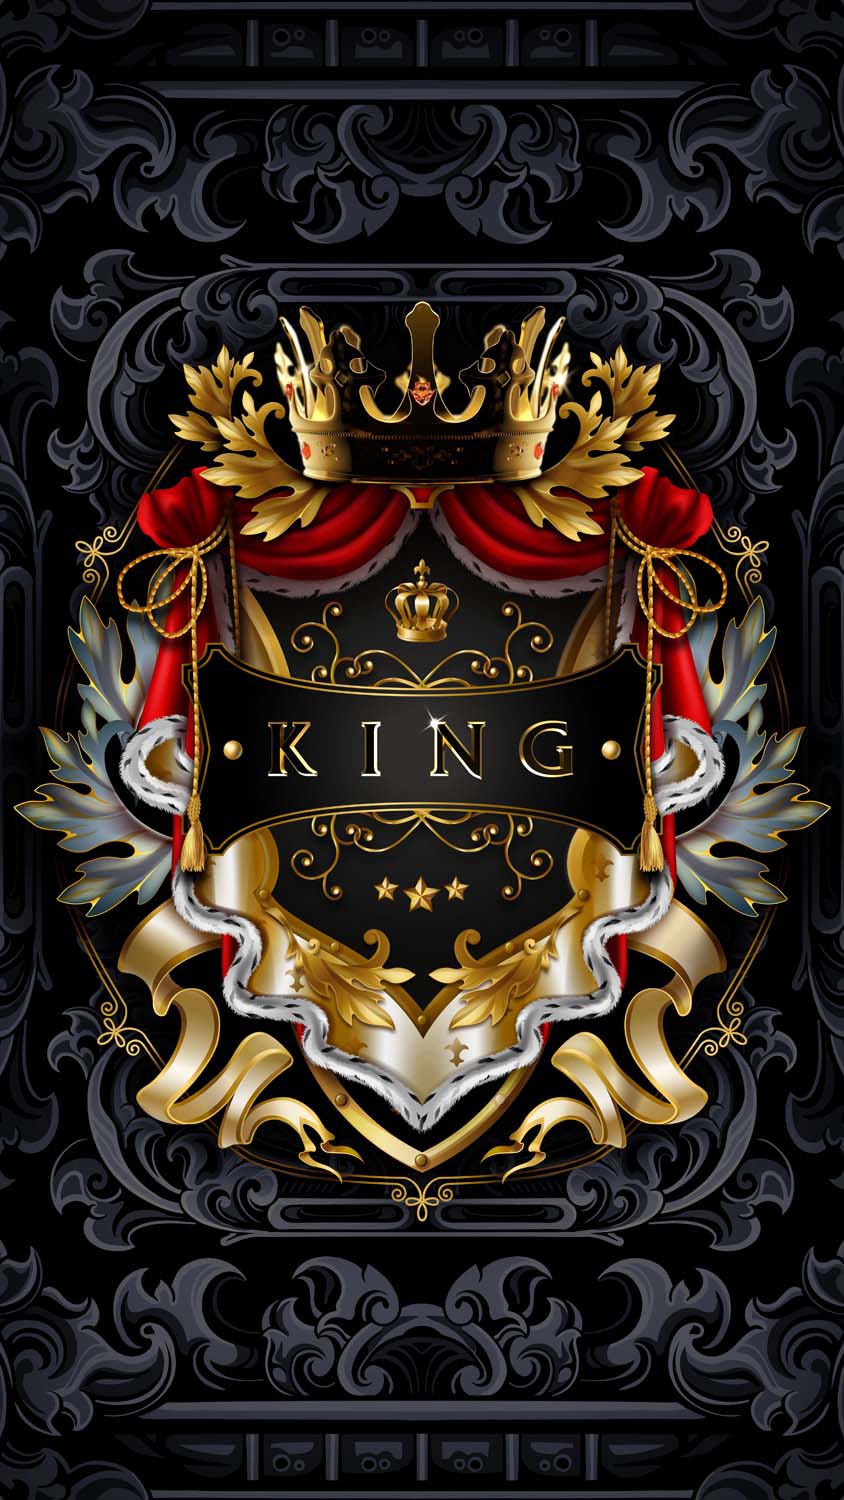 Royal King IPhone Wallpaper HD - IPhone Wallpapers : iPhone Wallpapers